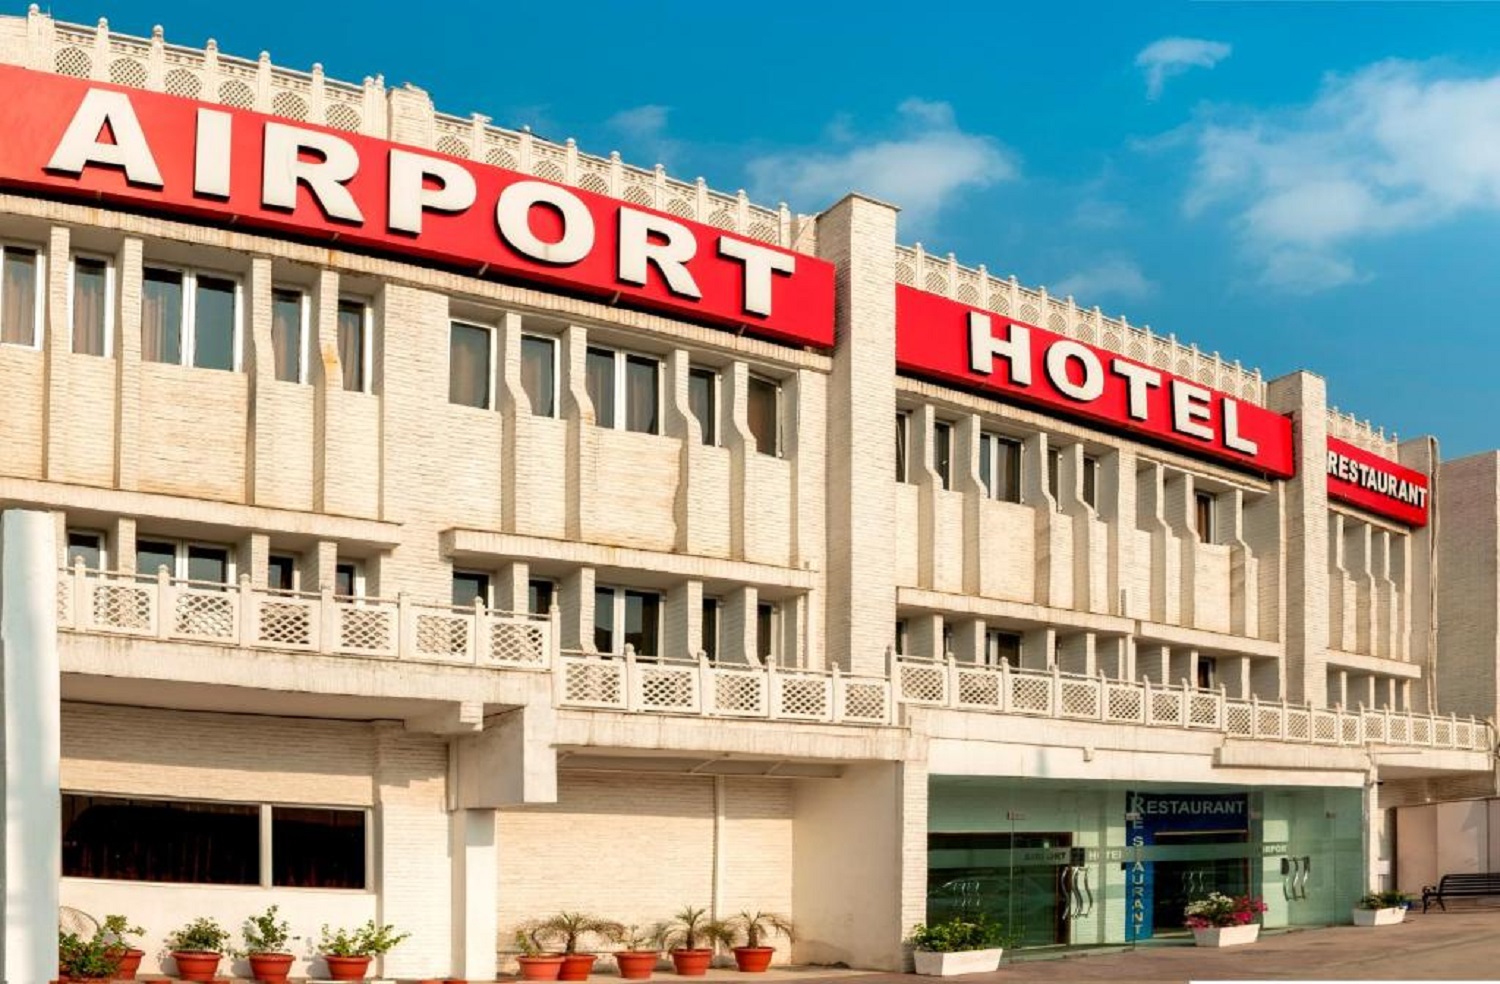 airport hotels